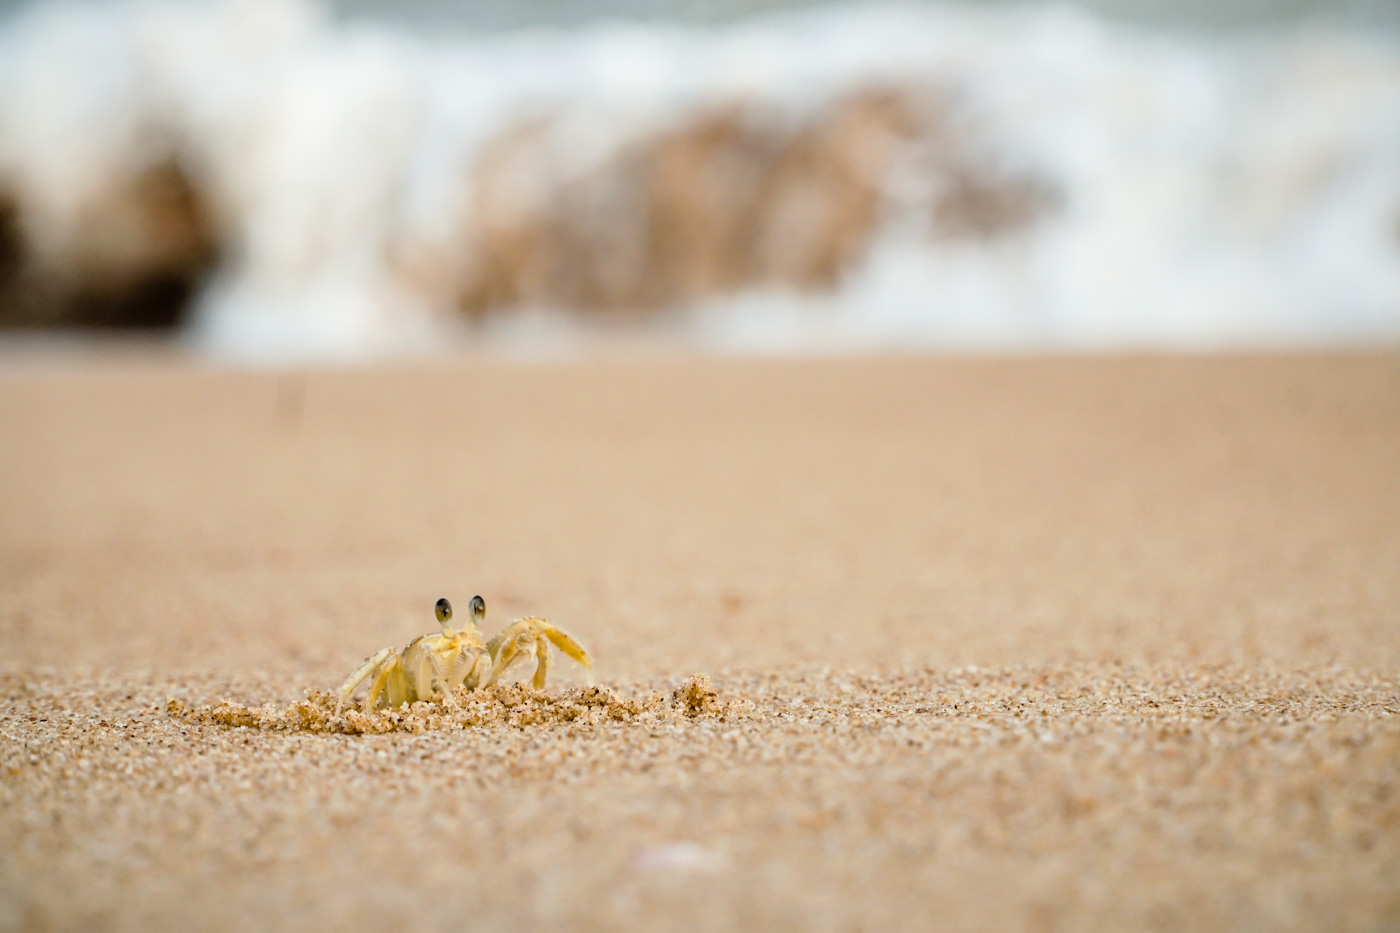 a crab coming out of the beach